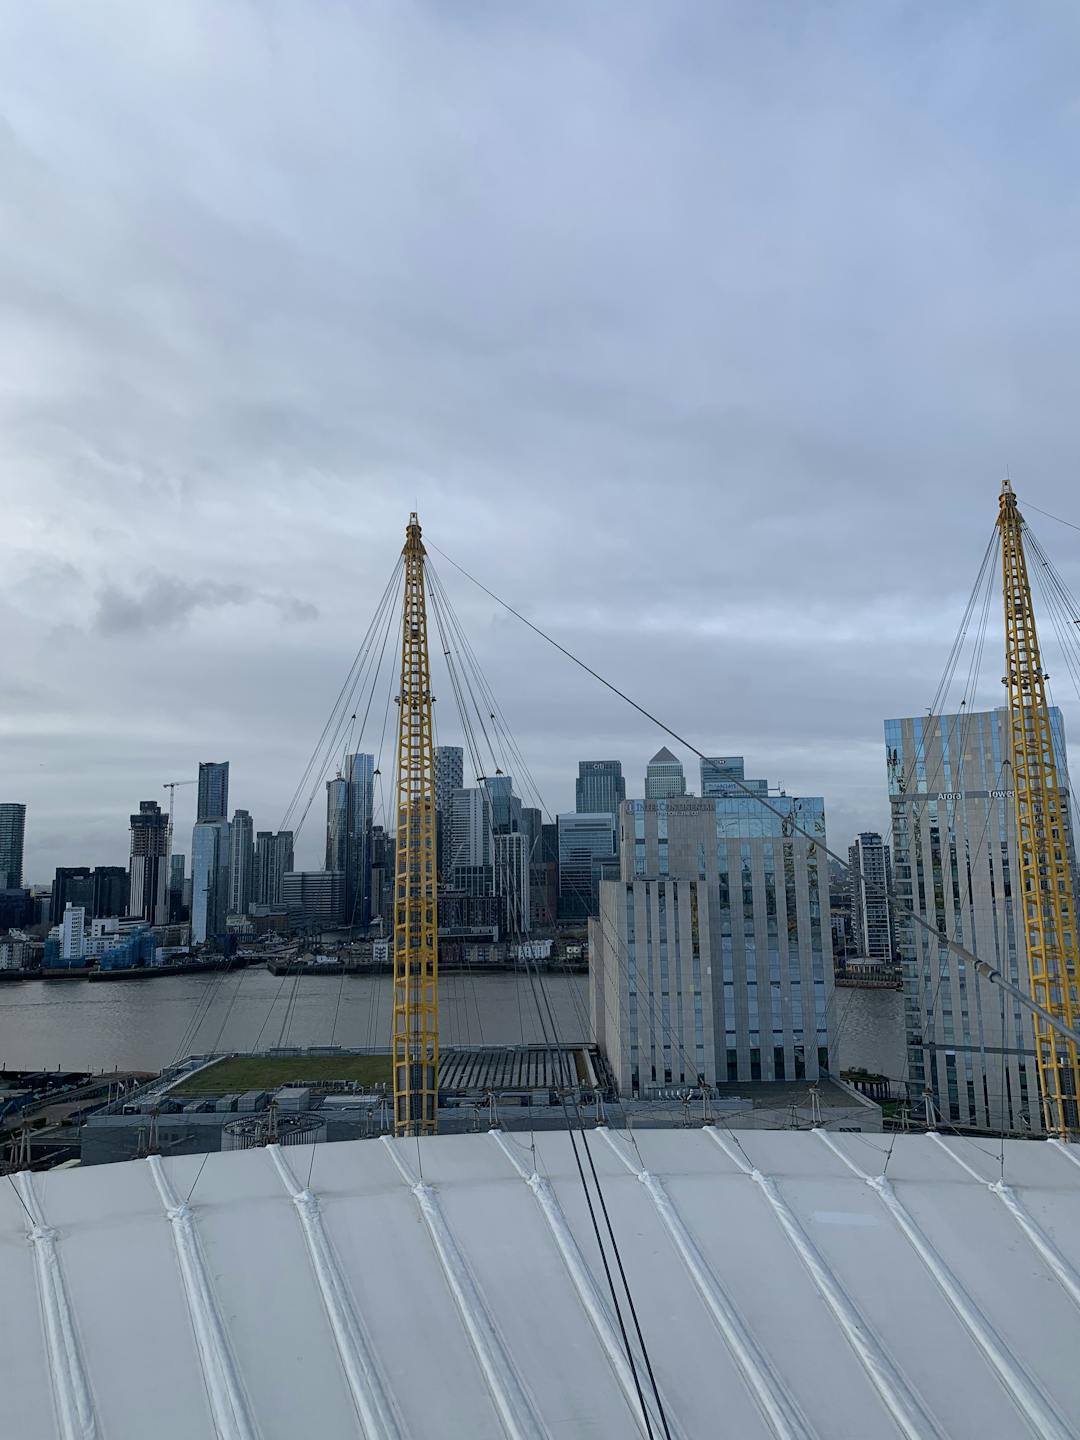 On top of the O2 Arena.